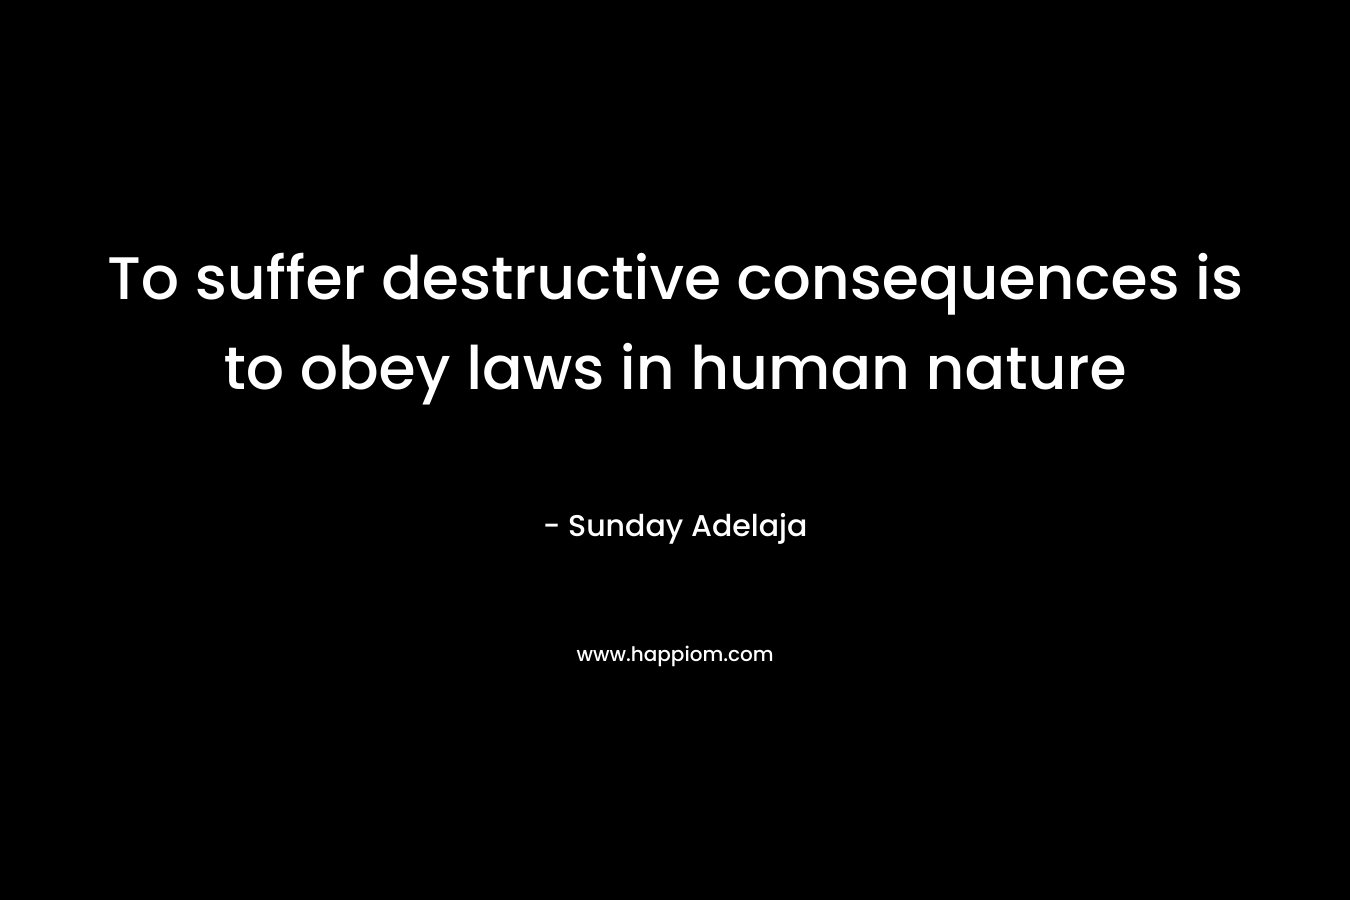 To suffer destructive consequences is to obey laws in human nature